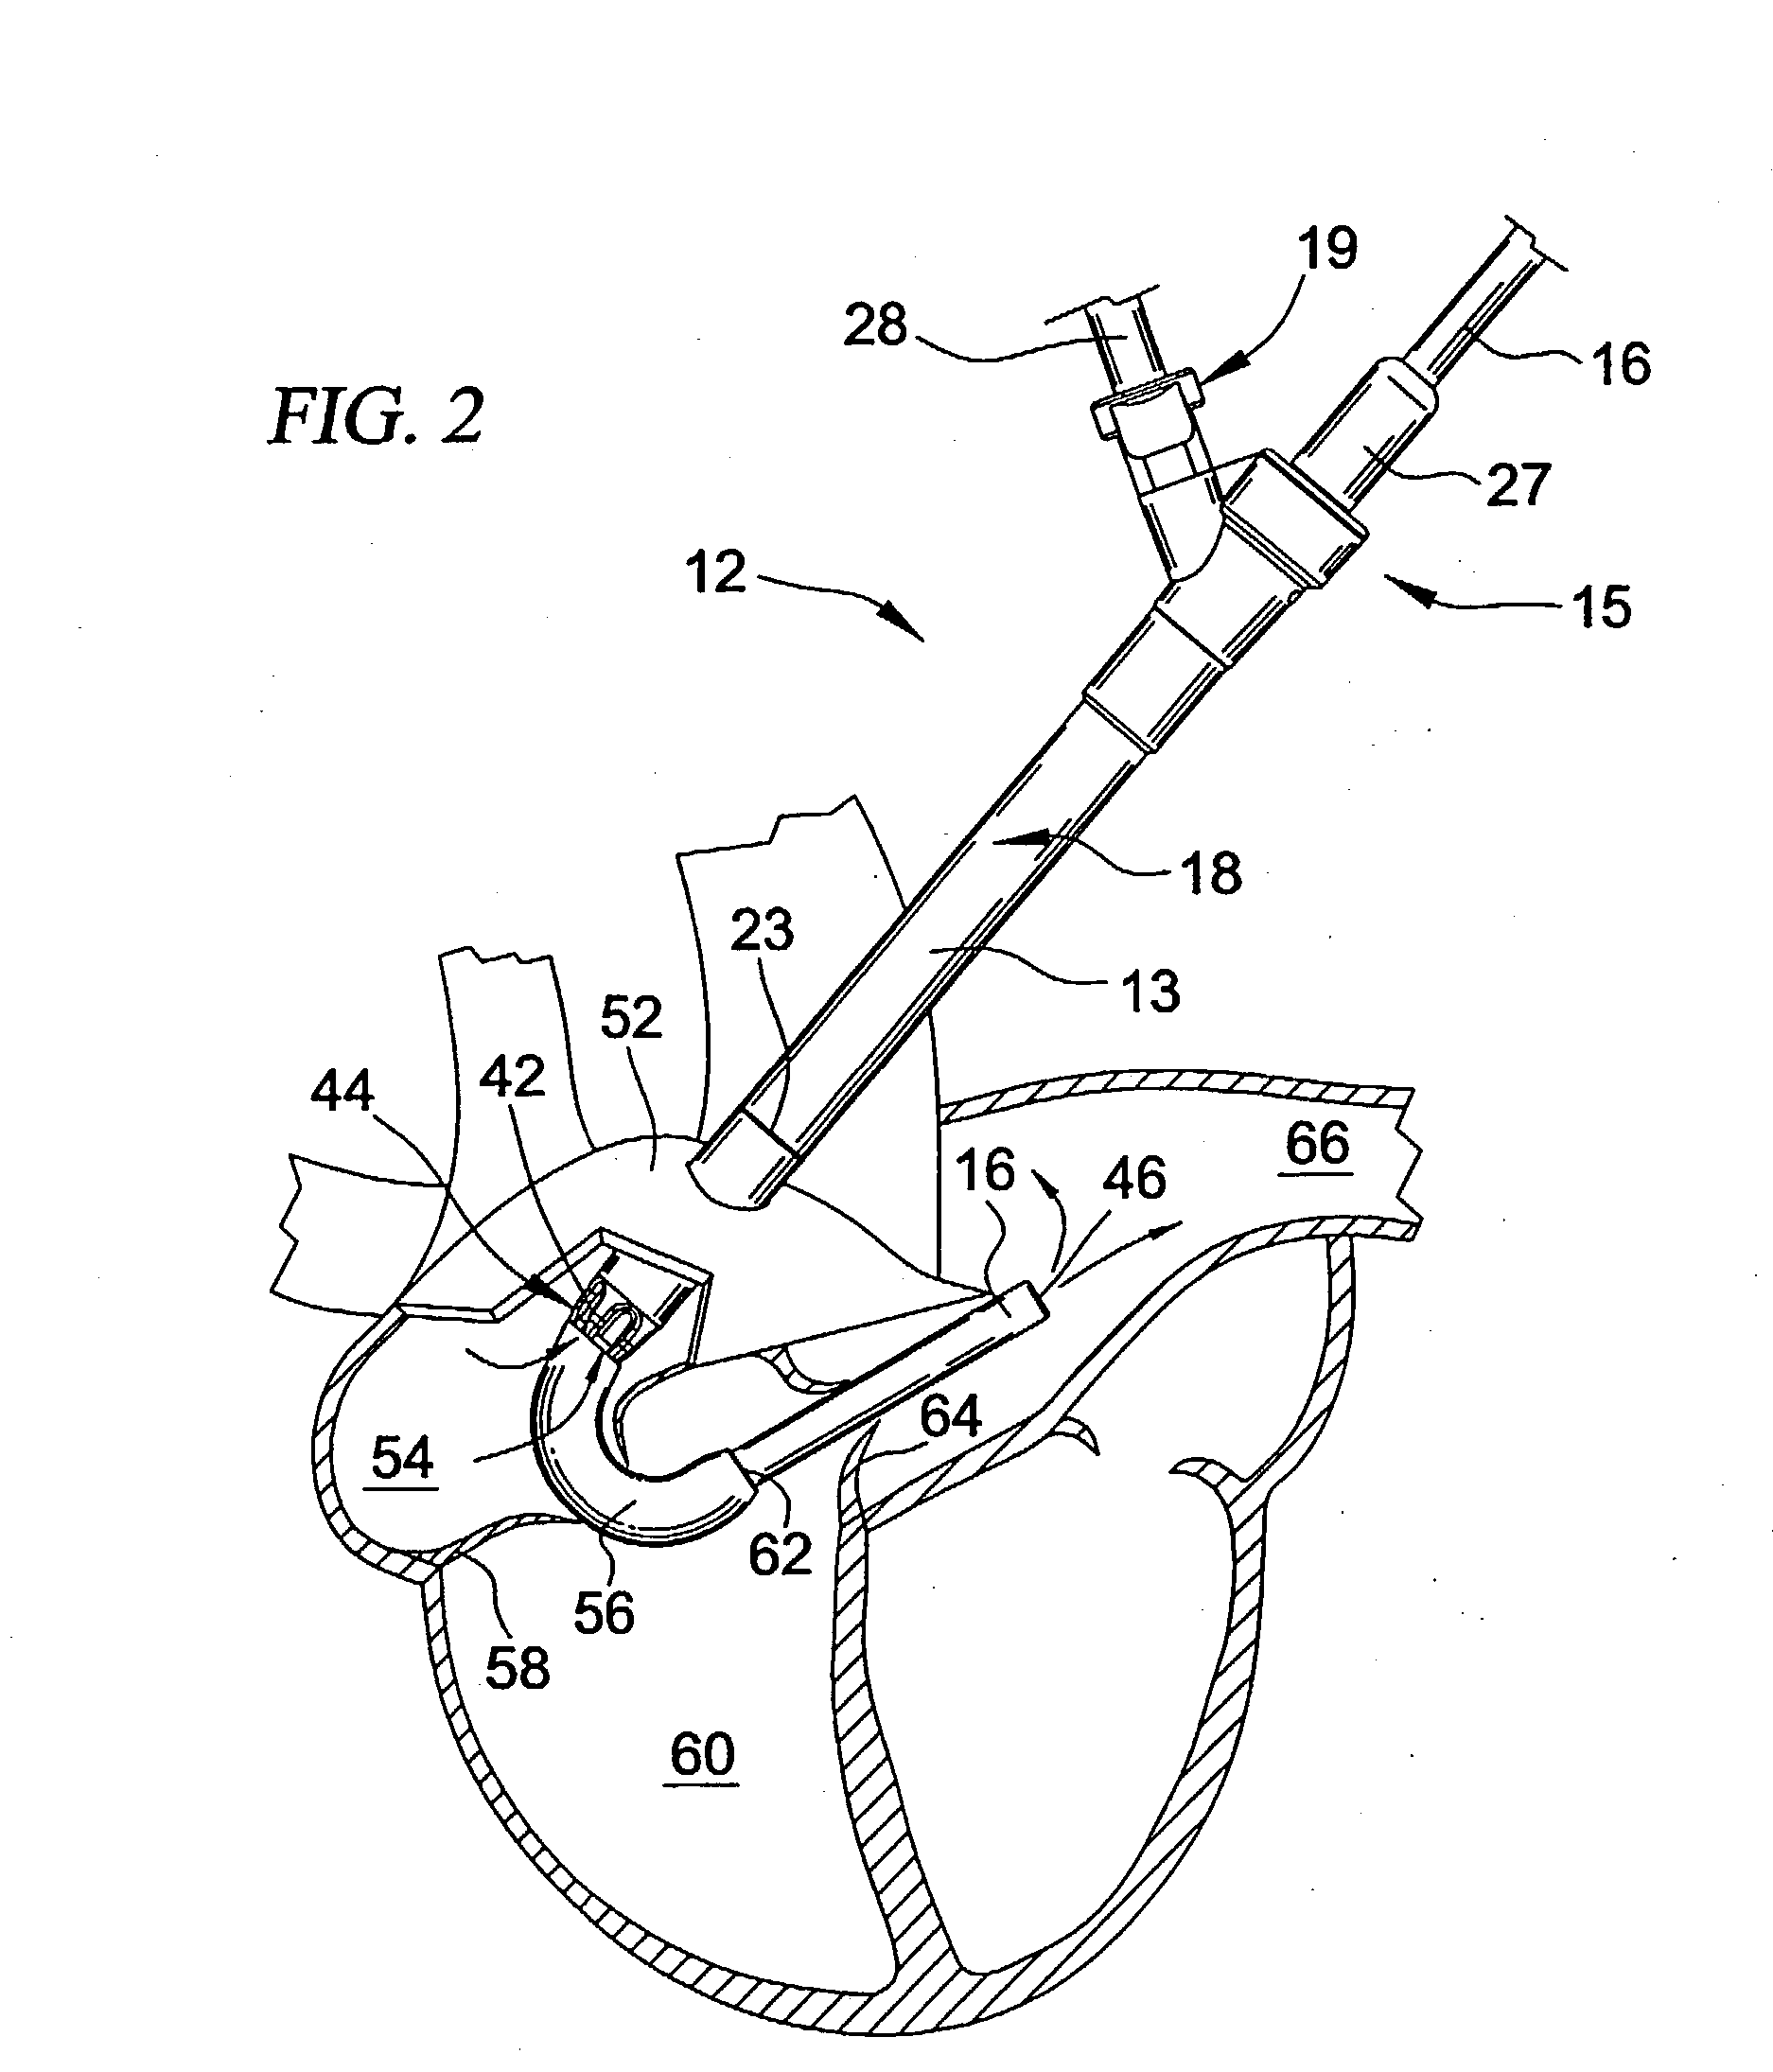 Cannulation system and related methods